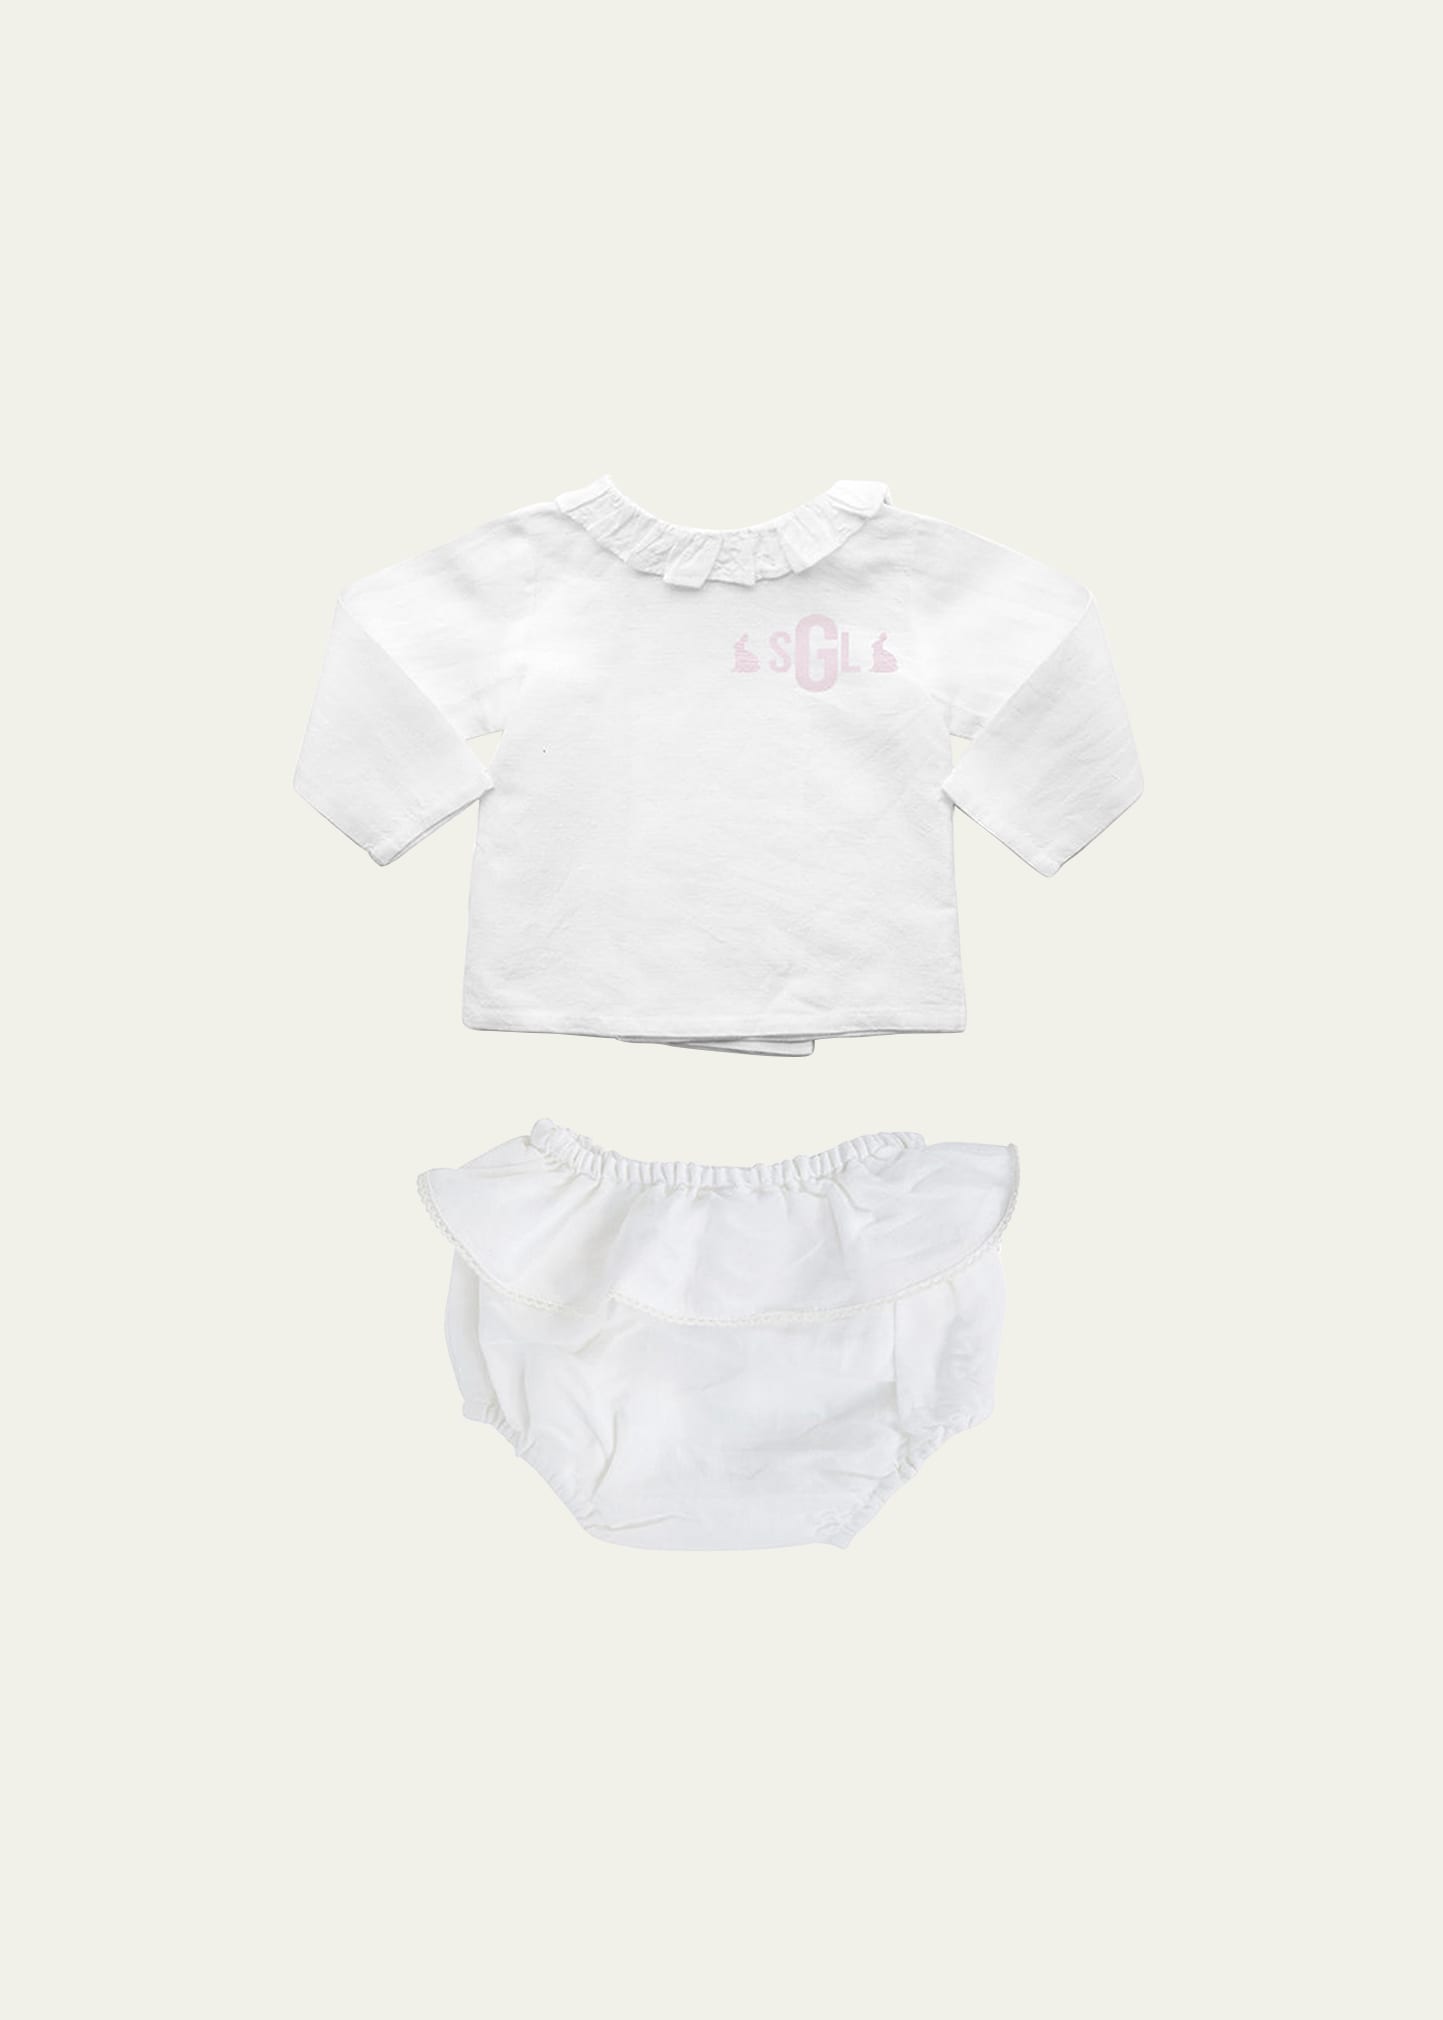 Louelle Girl's Top W/ Bloomers 2-Piece Gift Set, Size Newborn-24M